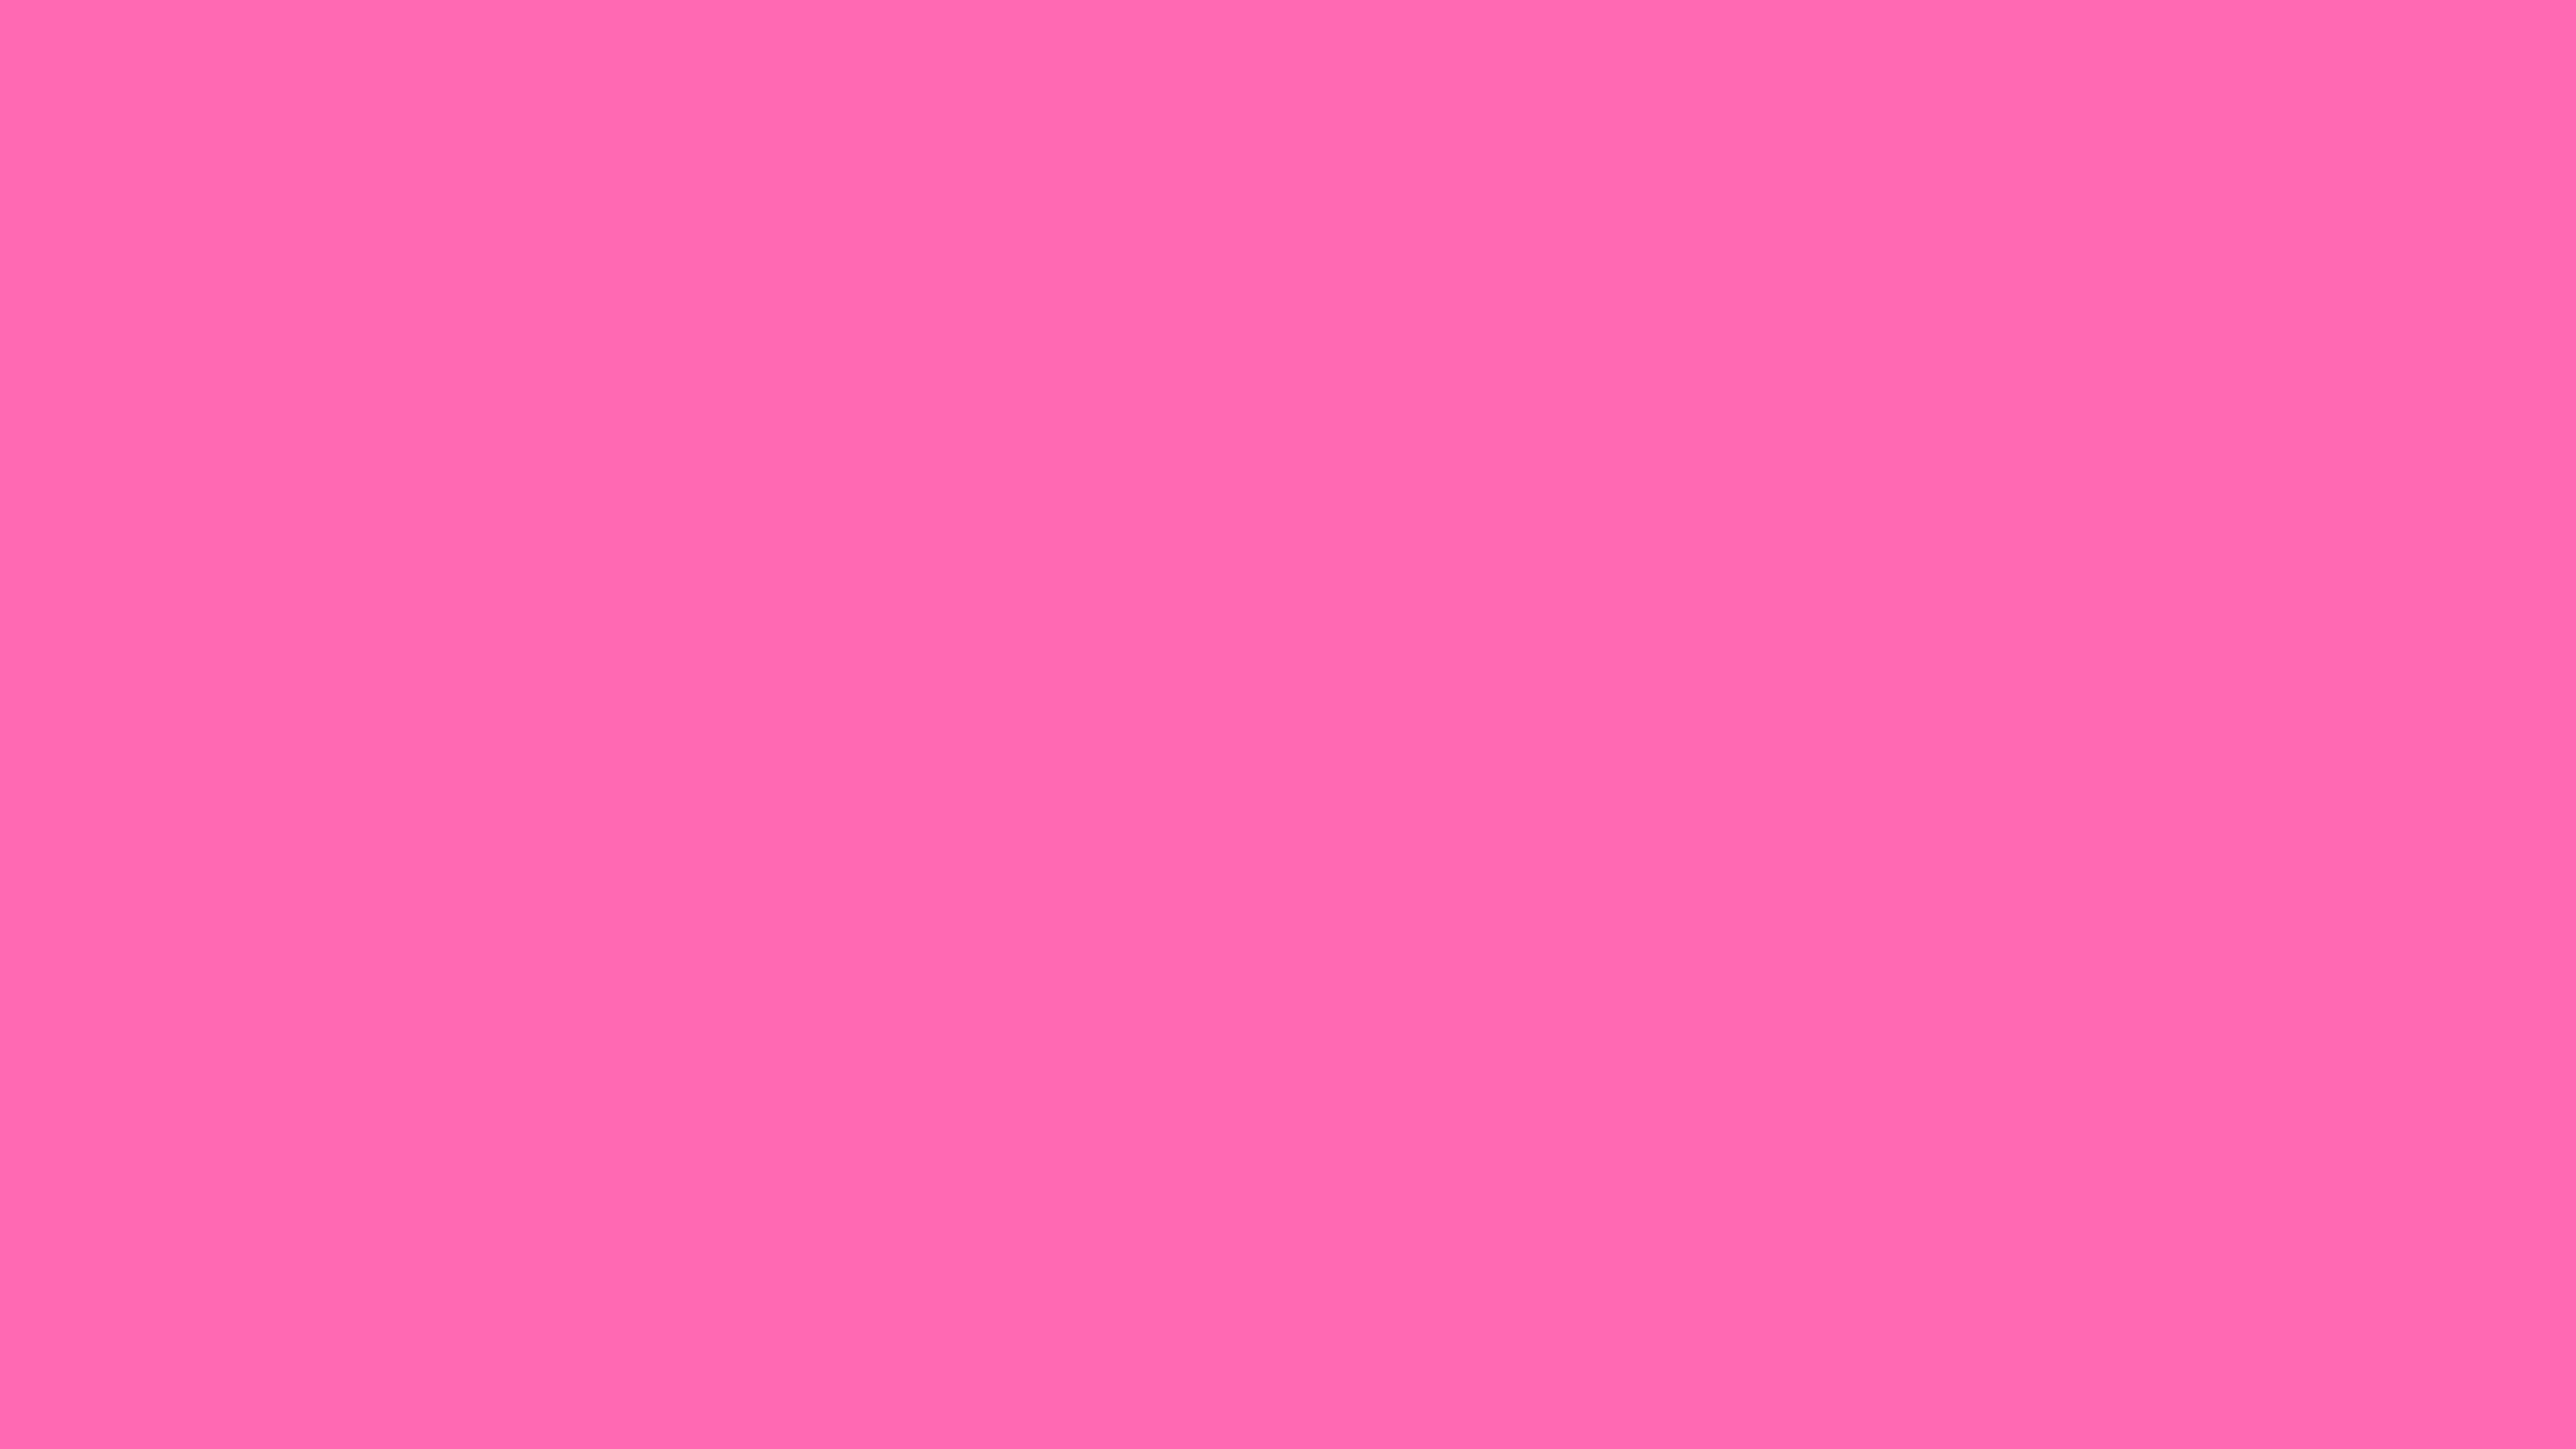 4096x2304 Hot Pink Solid Color Background